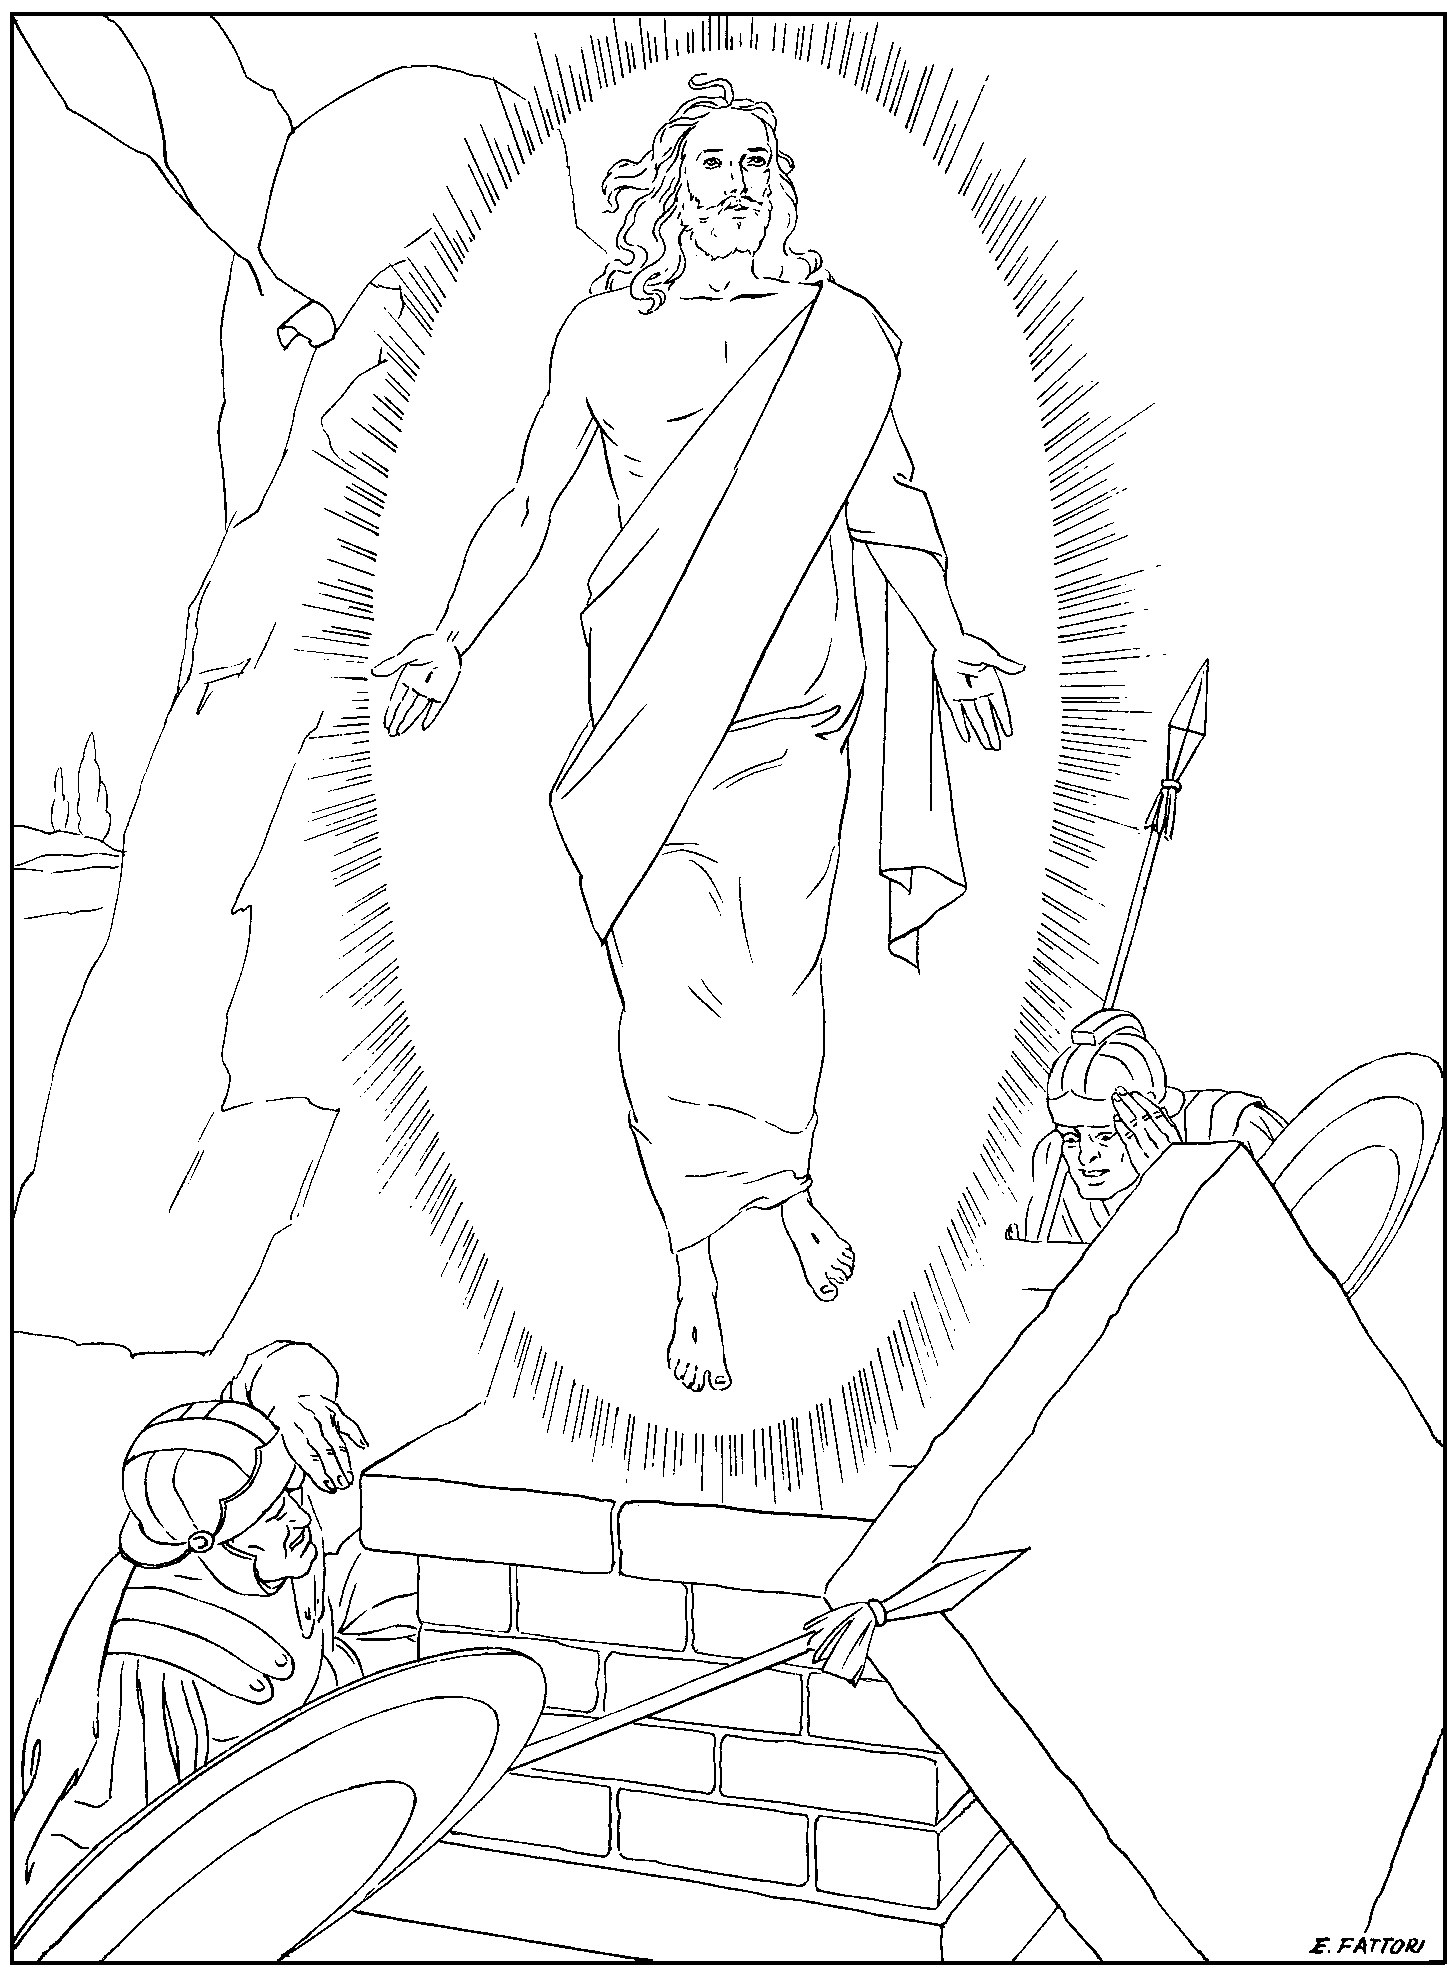 Rosary Beads Coloring Page at GetColorings.com | Free printable colorings pages to print and color